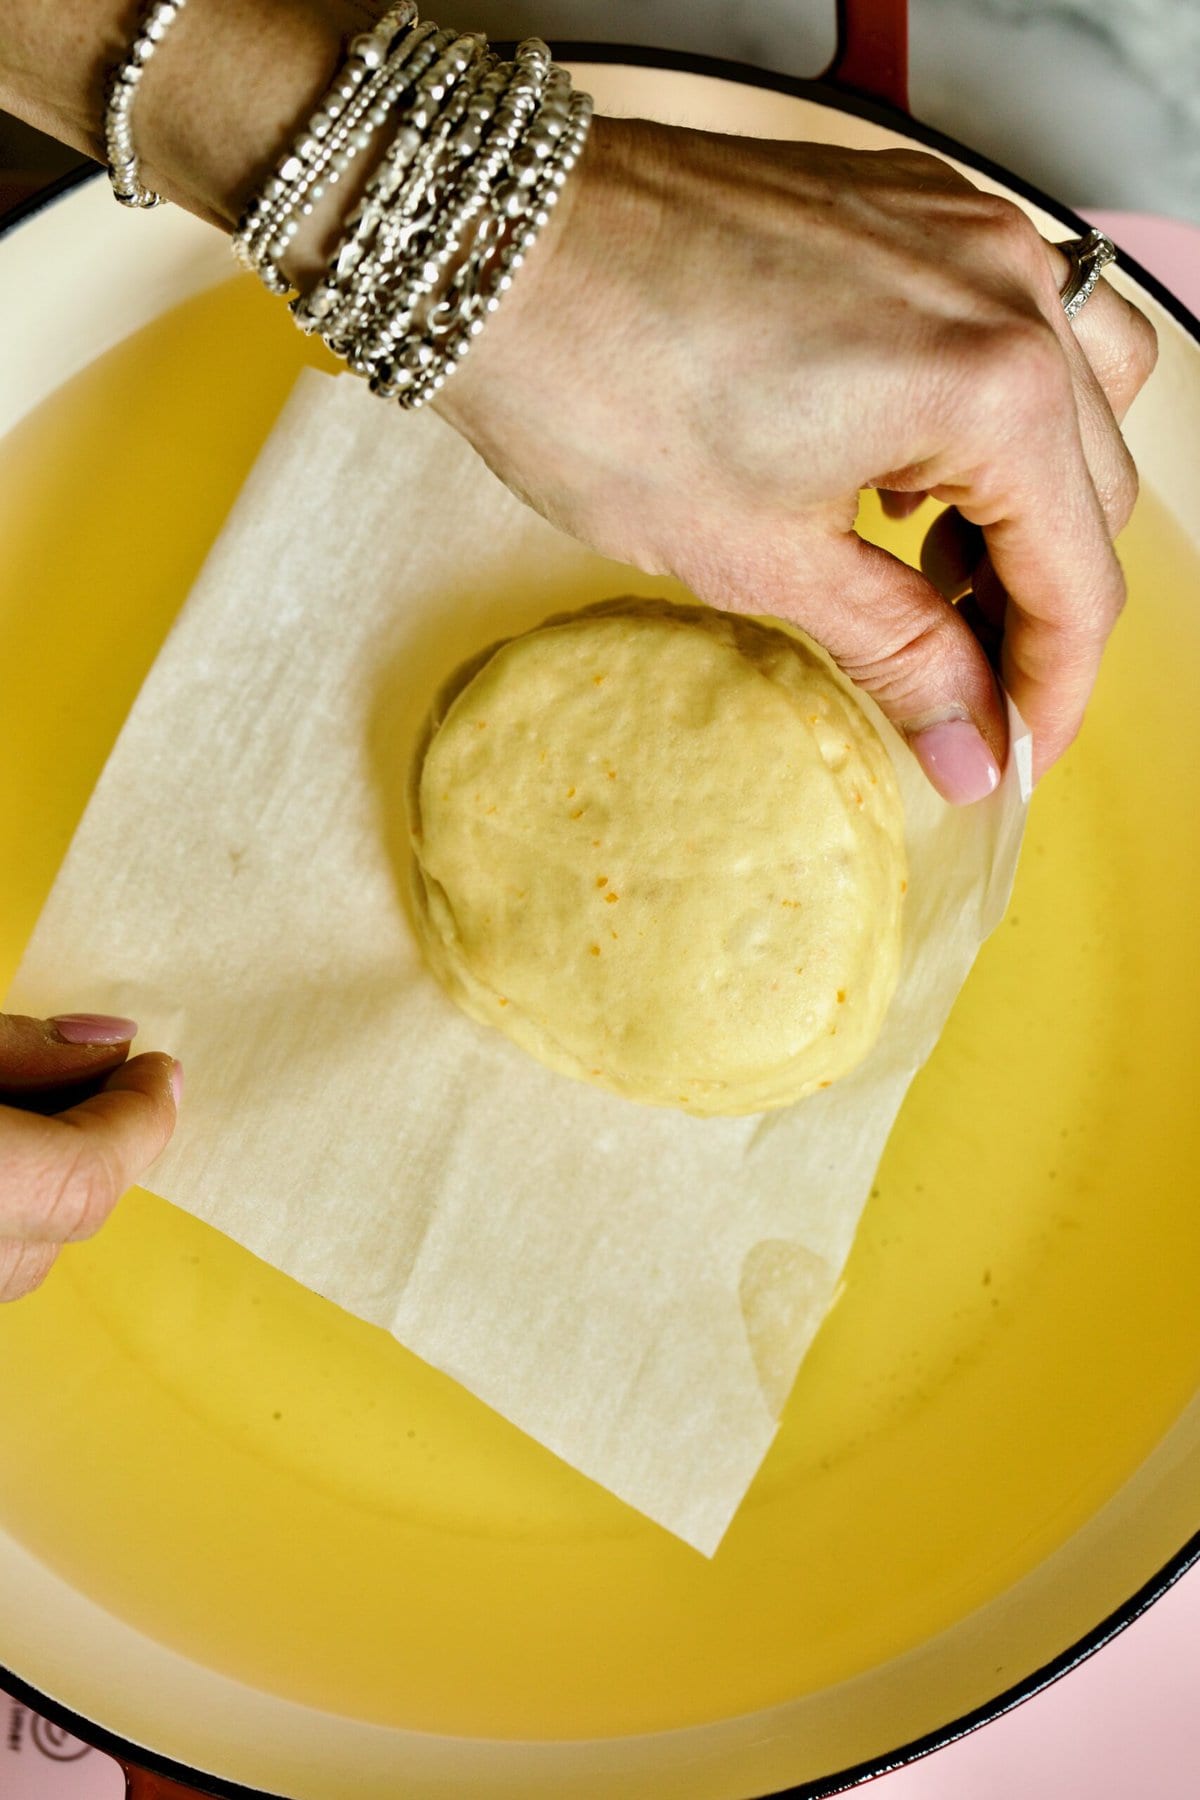 Process of making Bomboloni (how to make bomboloni recipe)- frying the donuts in oil- carefully placing parchment paper in hot oil to fry.